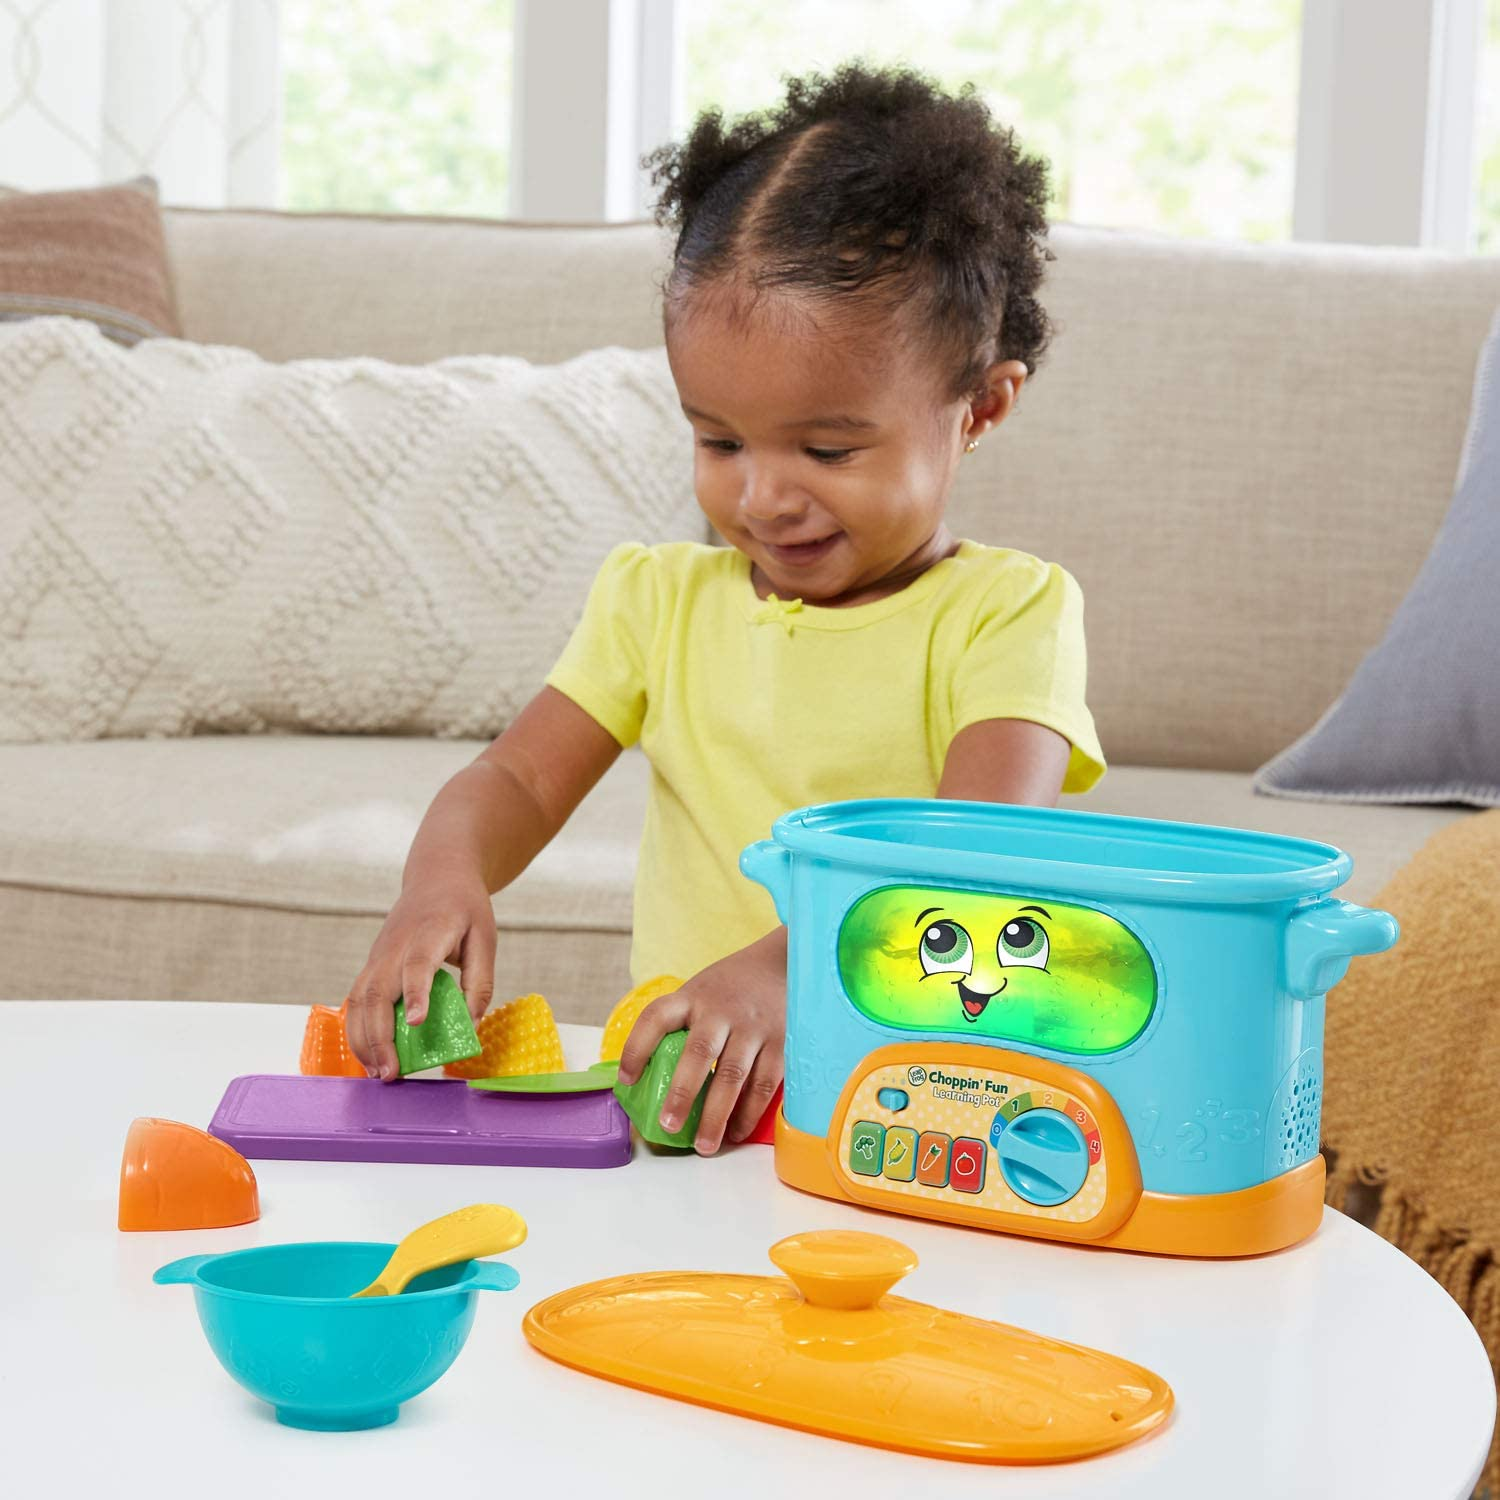 The best toys for one-year-olds that are both entertaining and educational